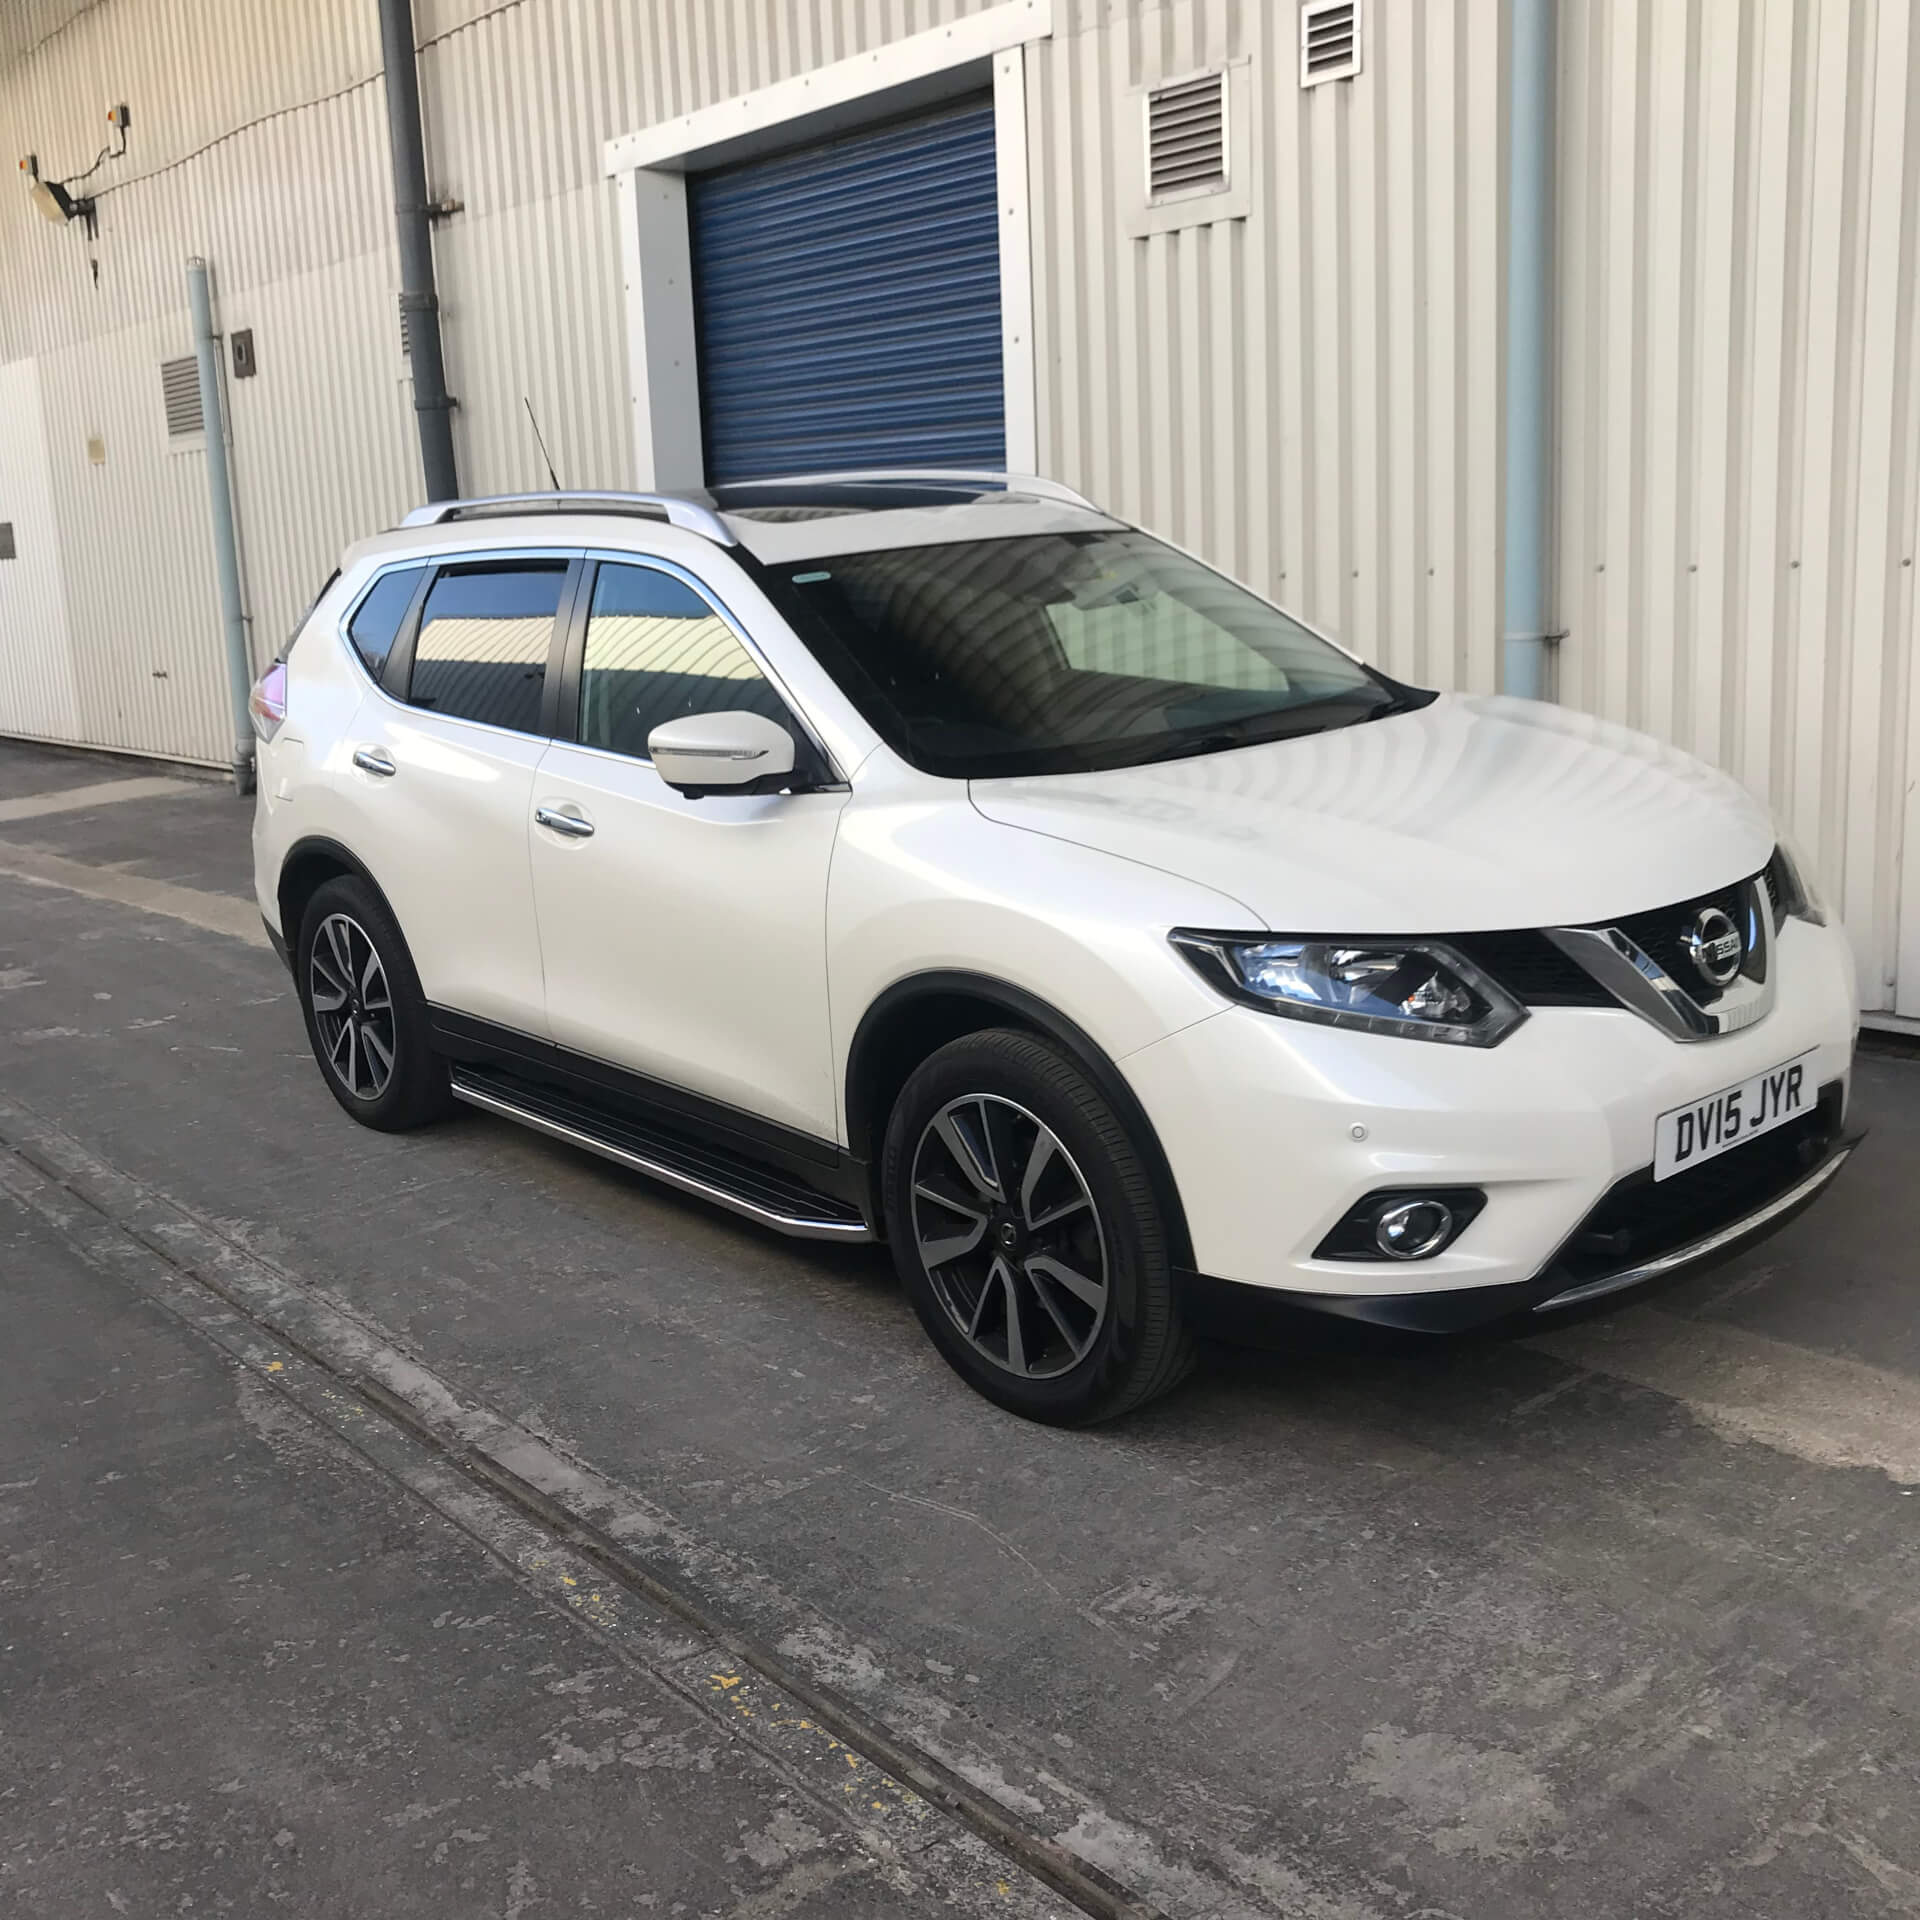 Direct4x4 accessories for Nissan X-Trail vehicles with a photo of a white Nissan X-Trail parked outside our depot fitted with raptor style side steps